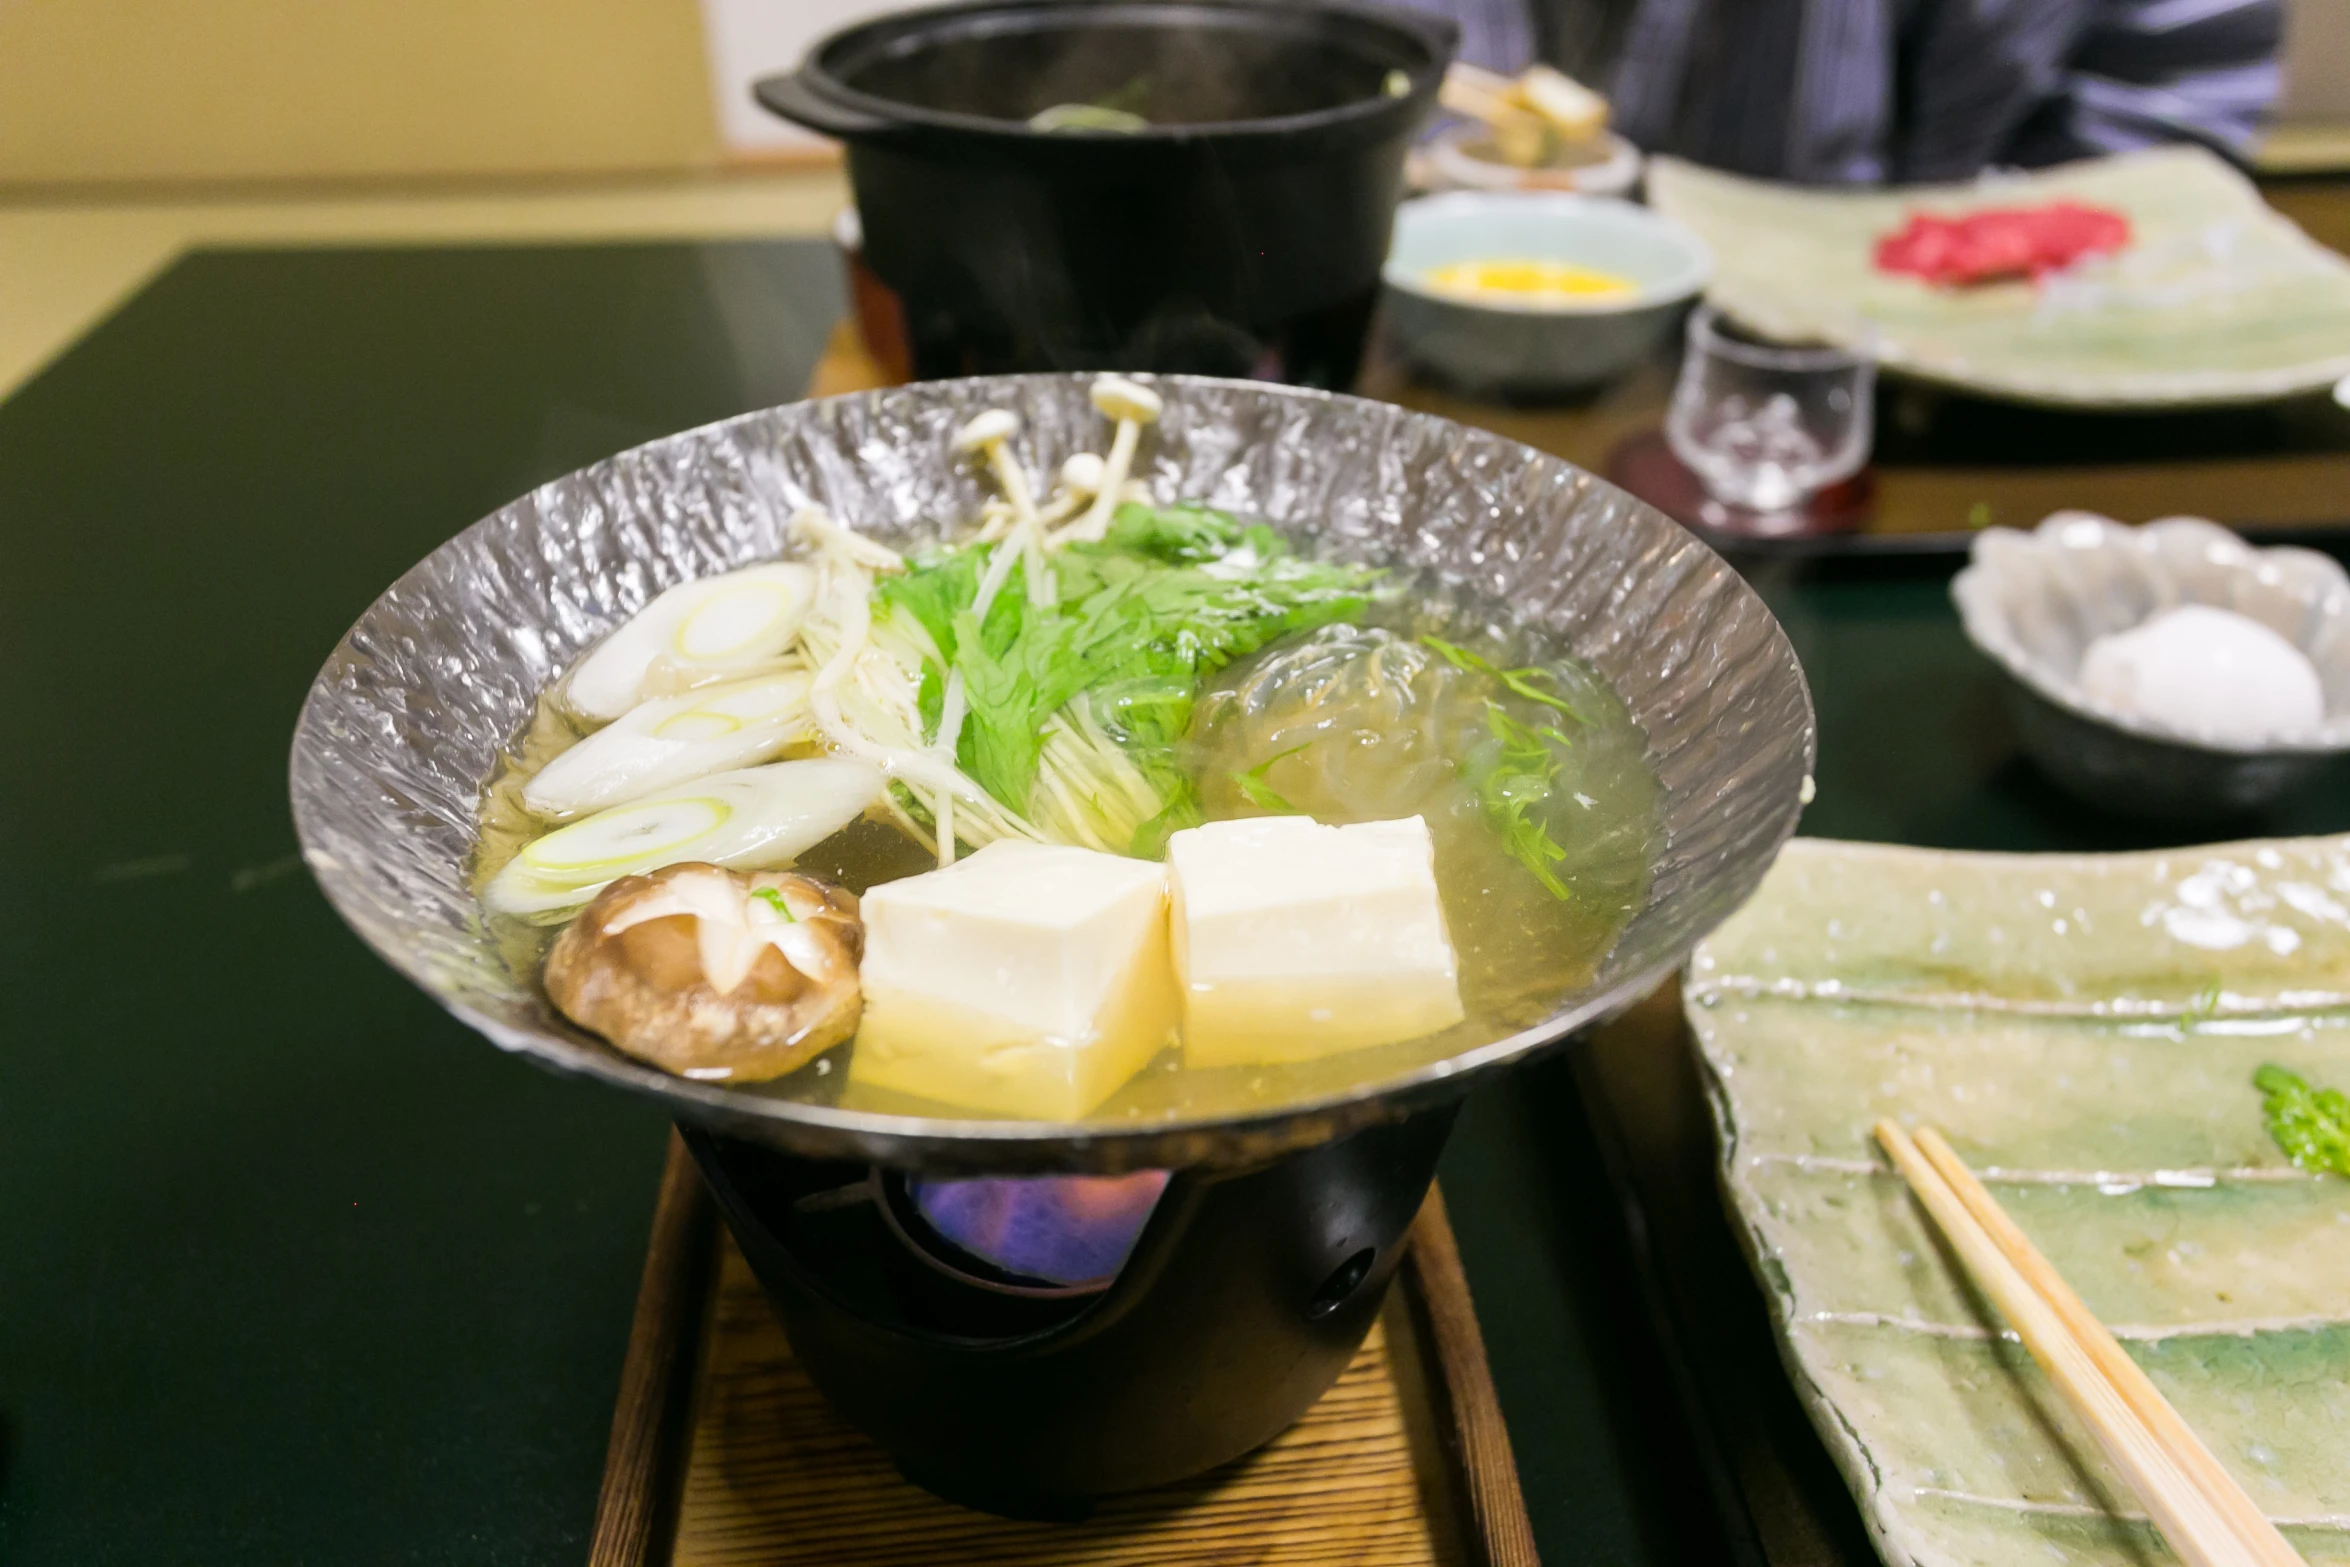 a bowl of soup, potatoes, lettuce, and other food items sit on a table